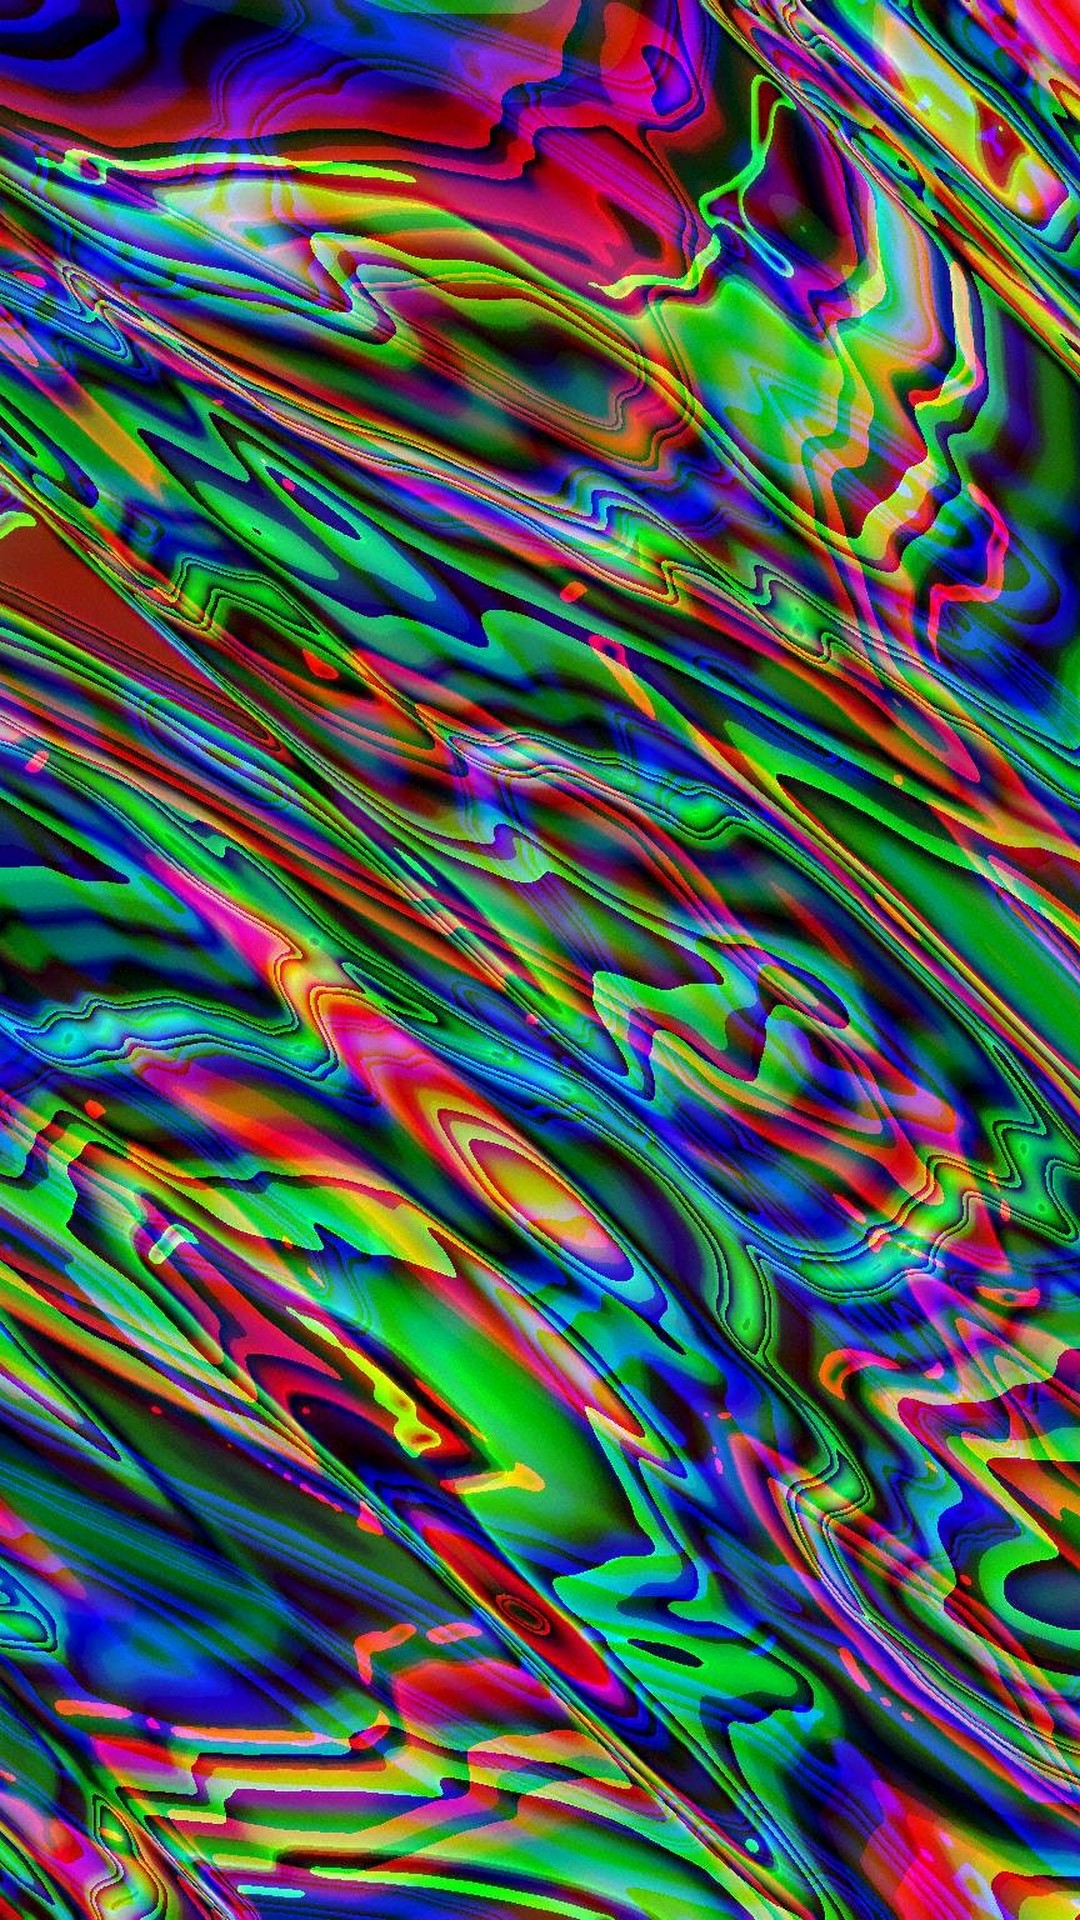 Trippy Colorful Android Wallpaper with HD resolution 1080x1920